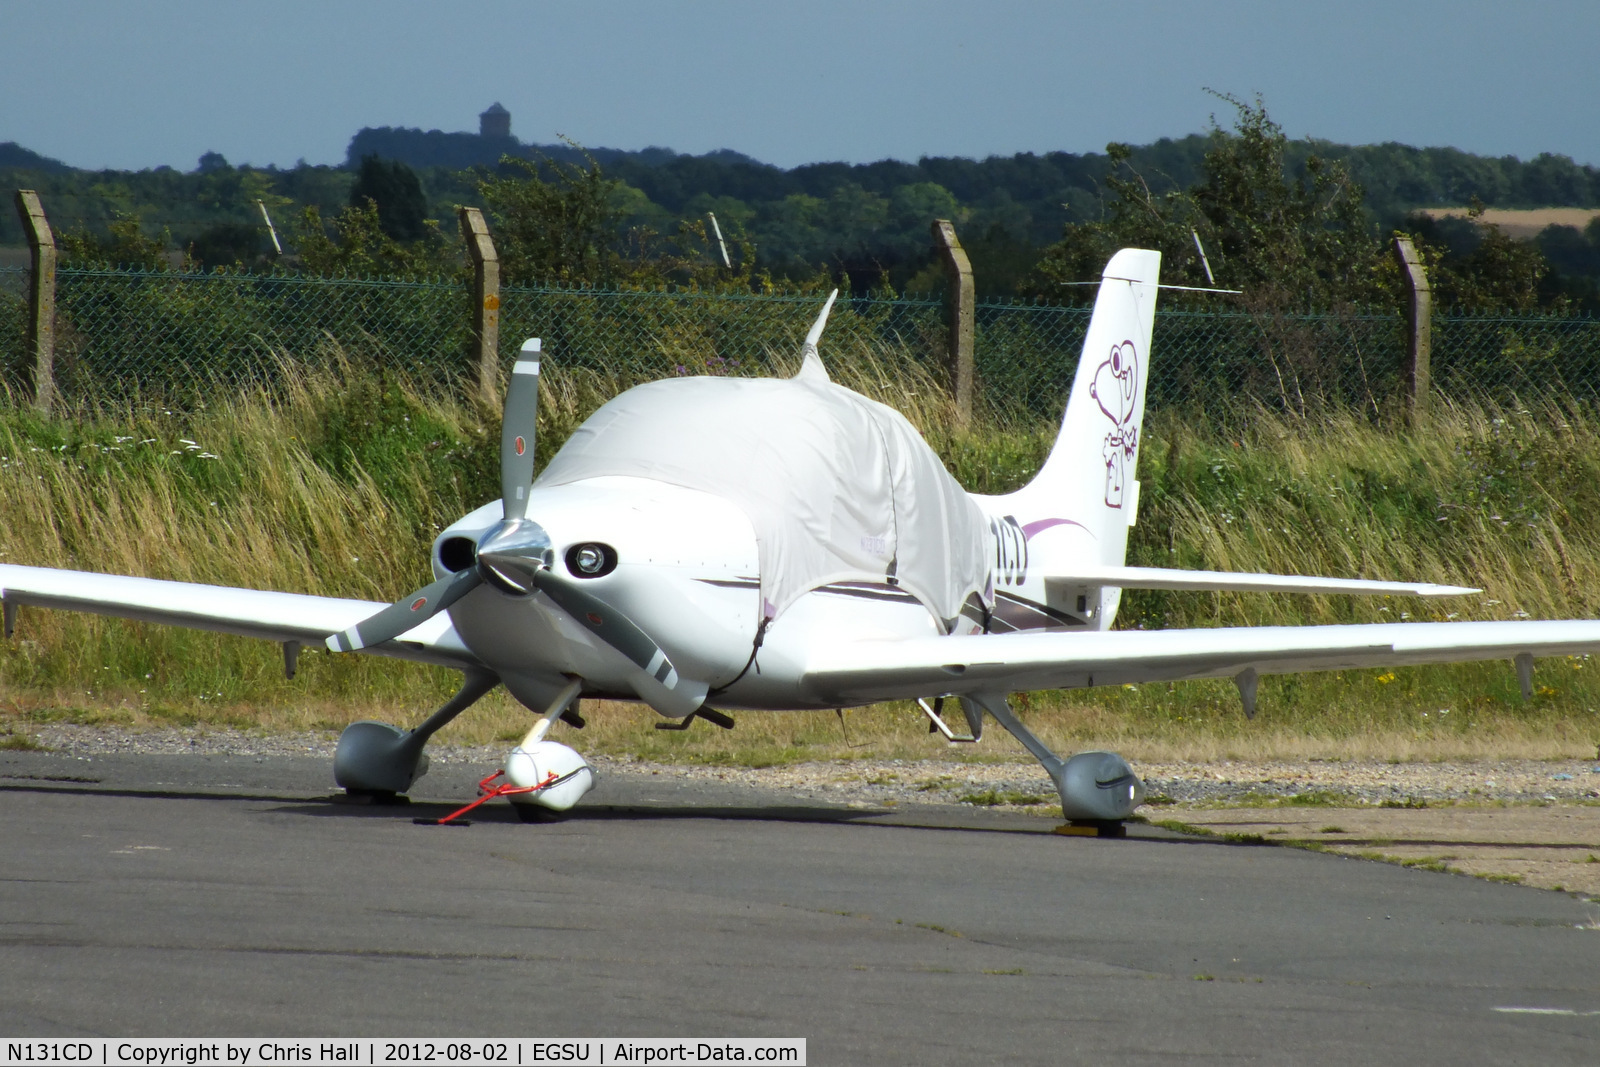 N131CD, 2000 Cirrus SR20 C/N 1031, parked at the eastern end of the airfield